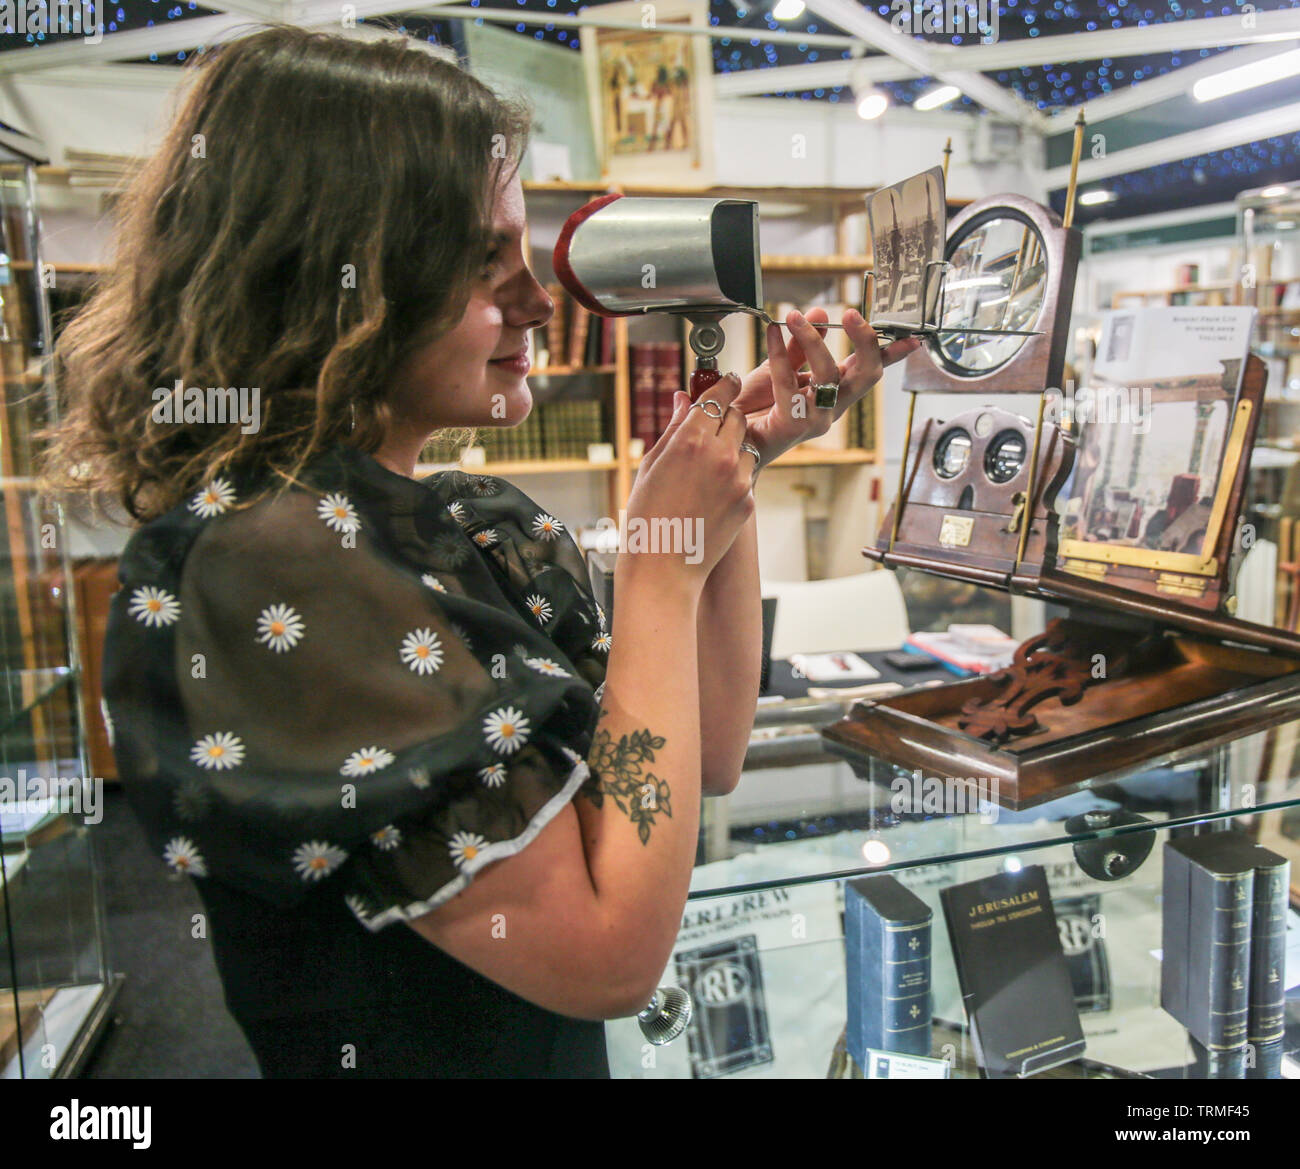 London, UK. 09 th June, 2019. Giulia from Italy looking trough a stereoscope i,device for viewing a stereoscopic pair of separate images, depicting left-eye and right-eye views of the same scene, as a single three-dimensional image shown by Robert  Frew Ltd at The London's  First Rare Book Fair, . Paul Quezada-Neiman /Alamy Live News Stock Photo